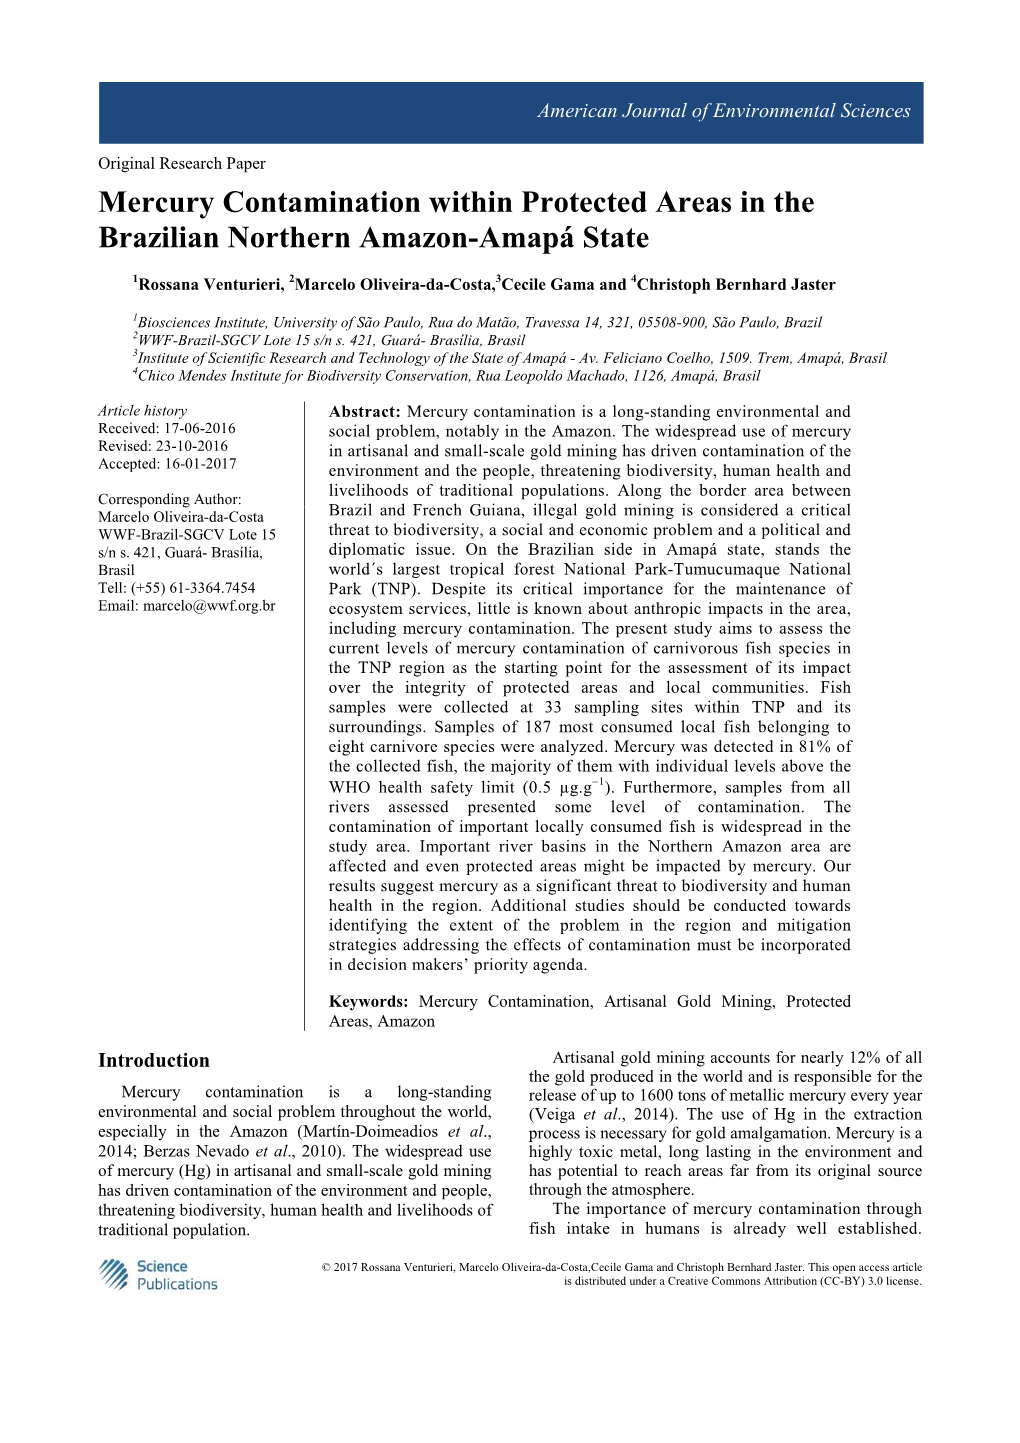 Mercury Contamination Within Protected Areas in the Brazilian Northern Amazon-Amapá State